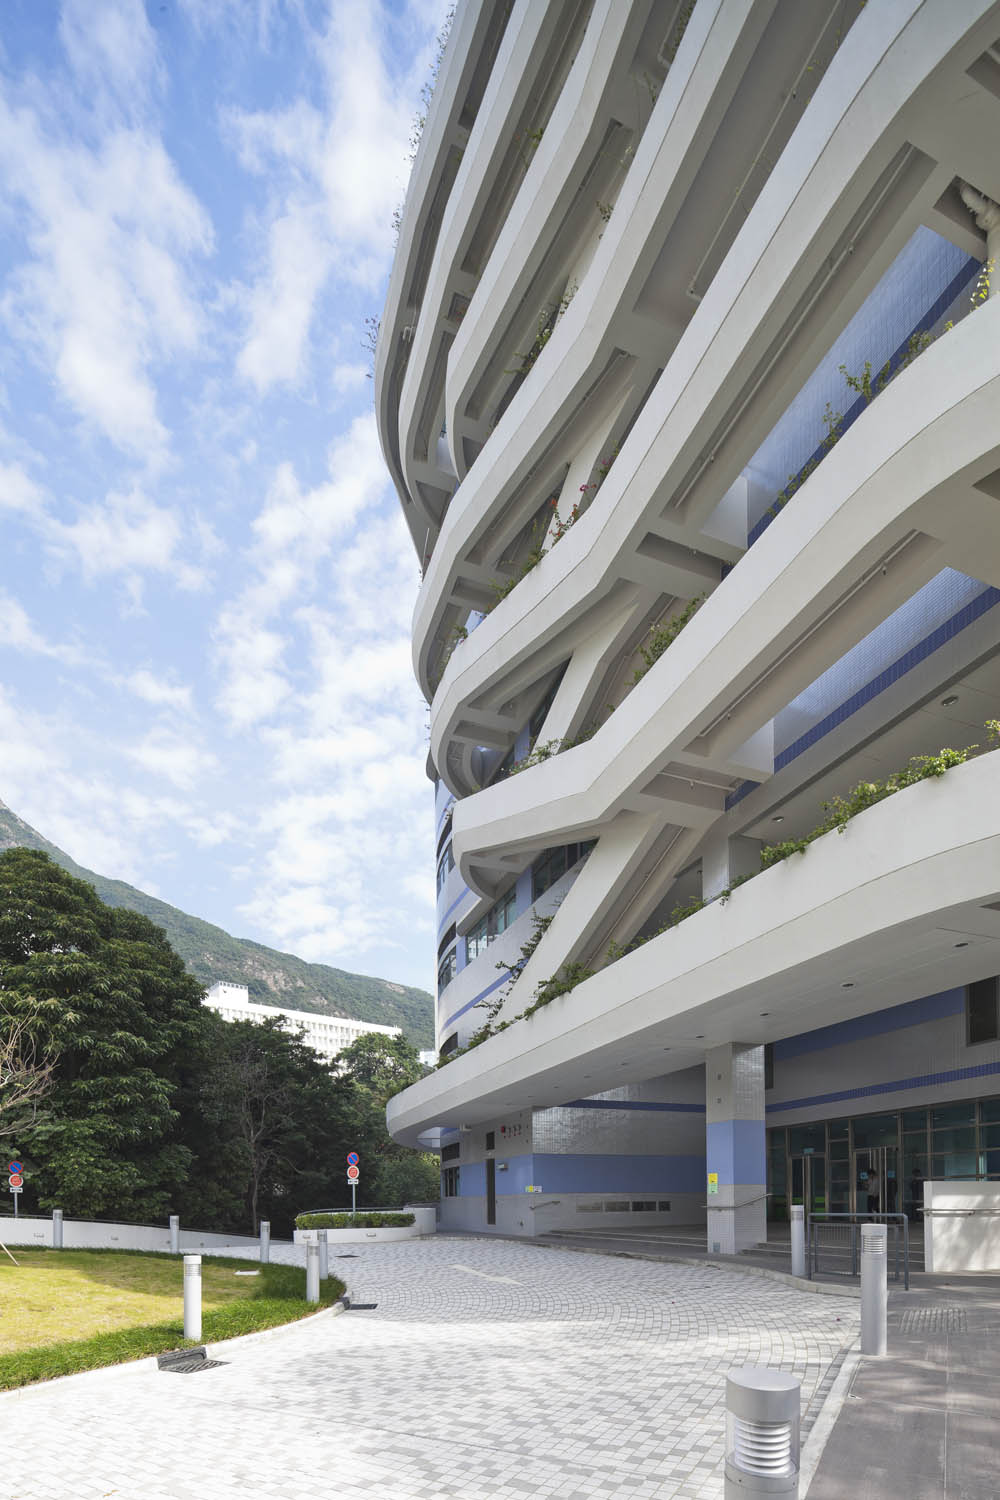 HKJC BUILDING FOR INTERDISCIPLINARY RESEARCH